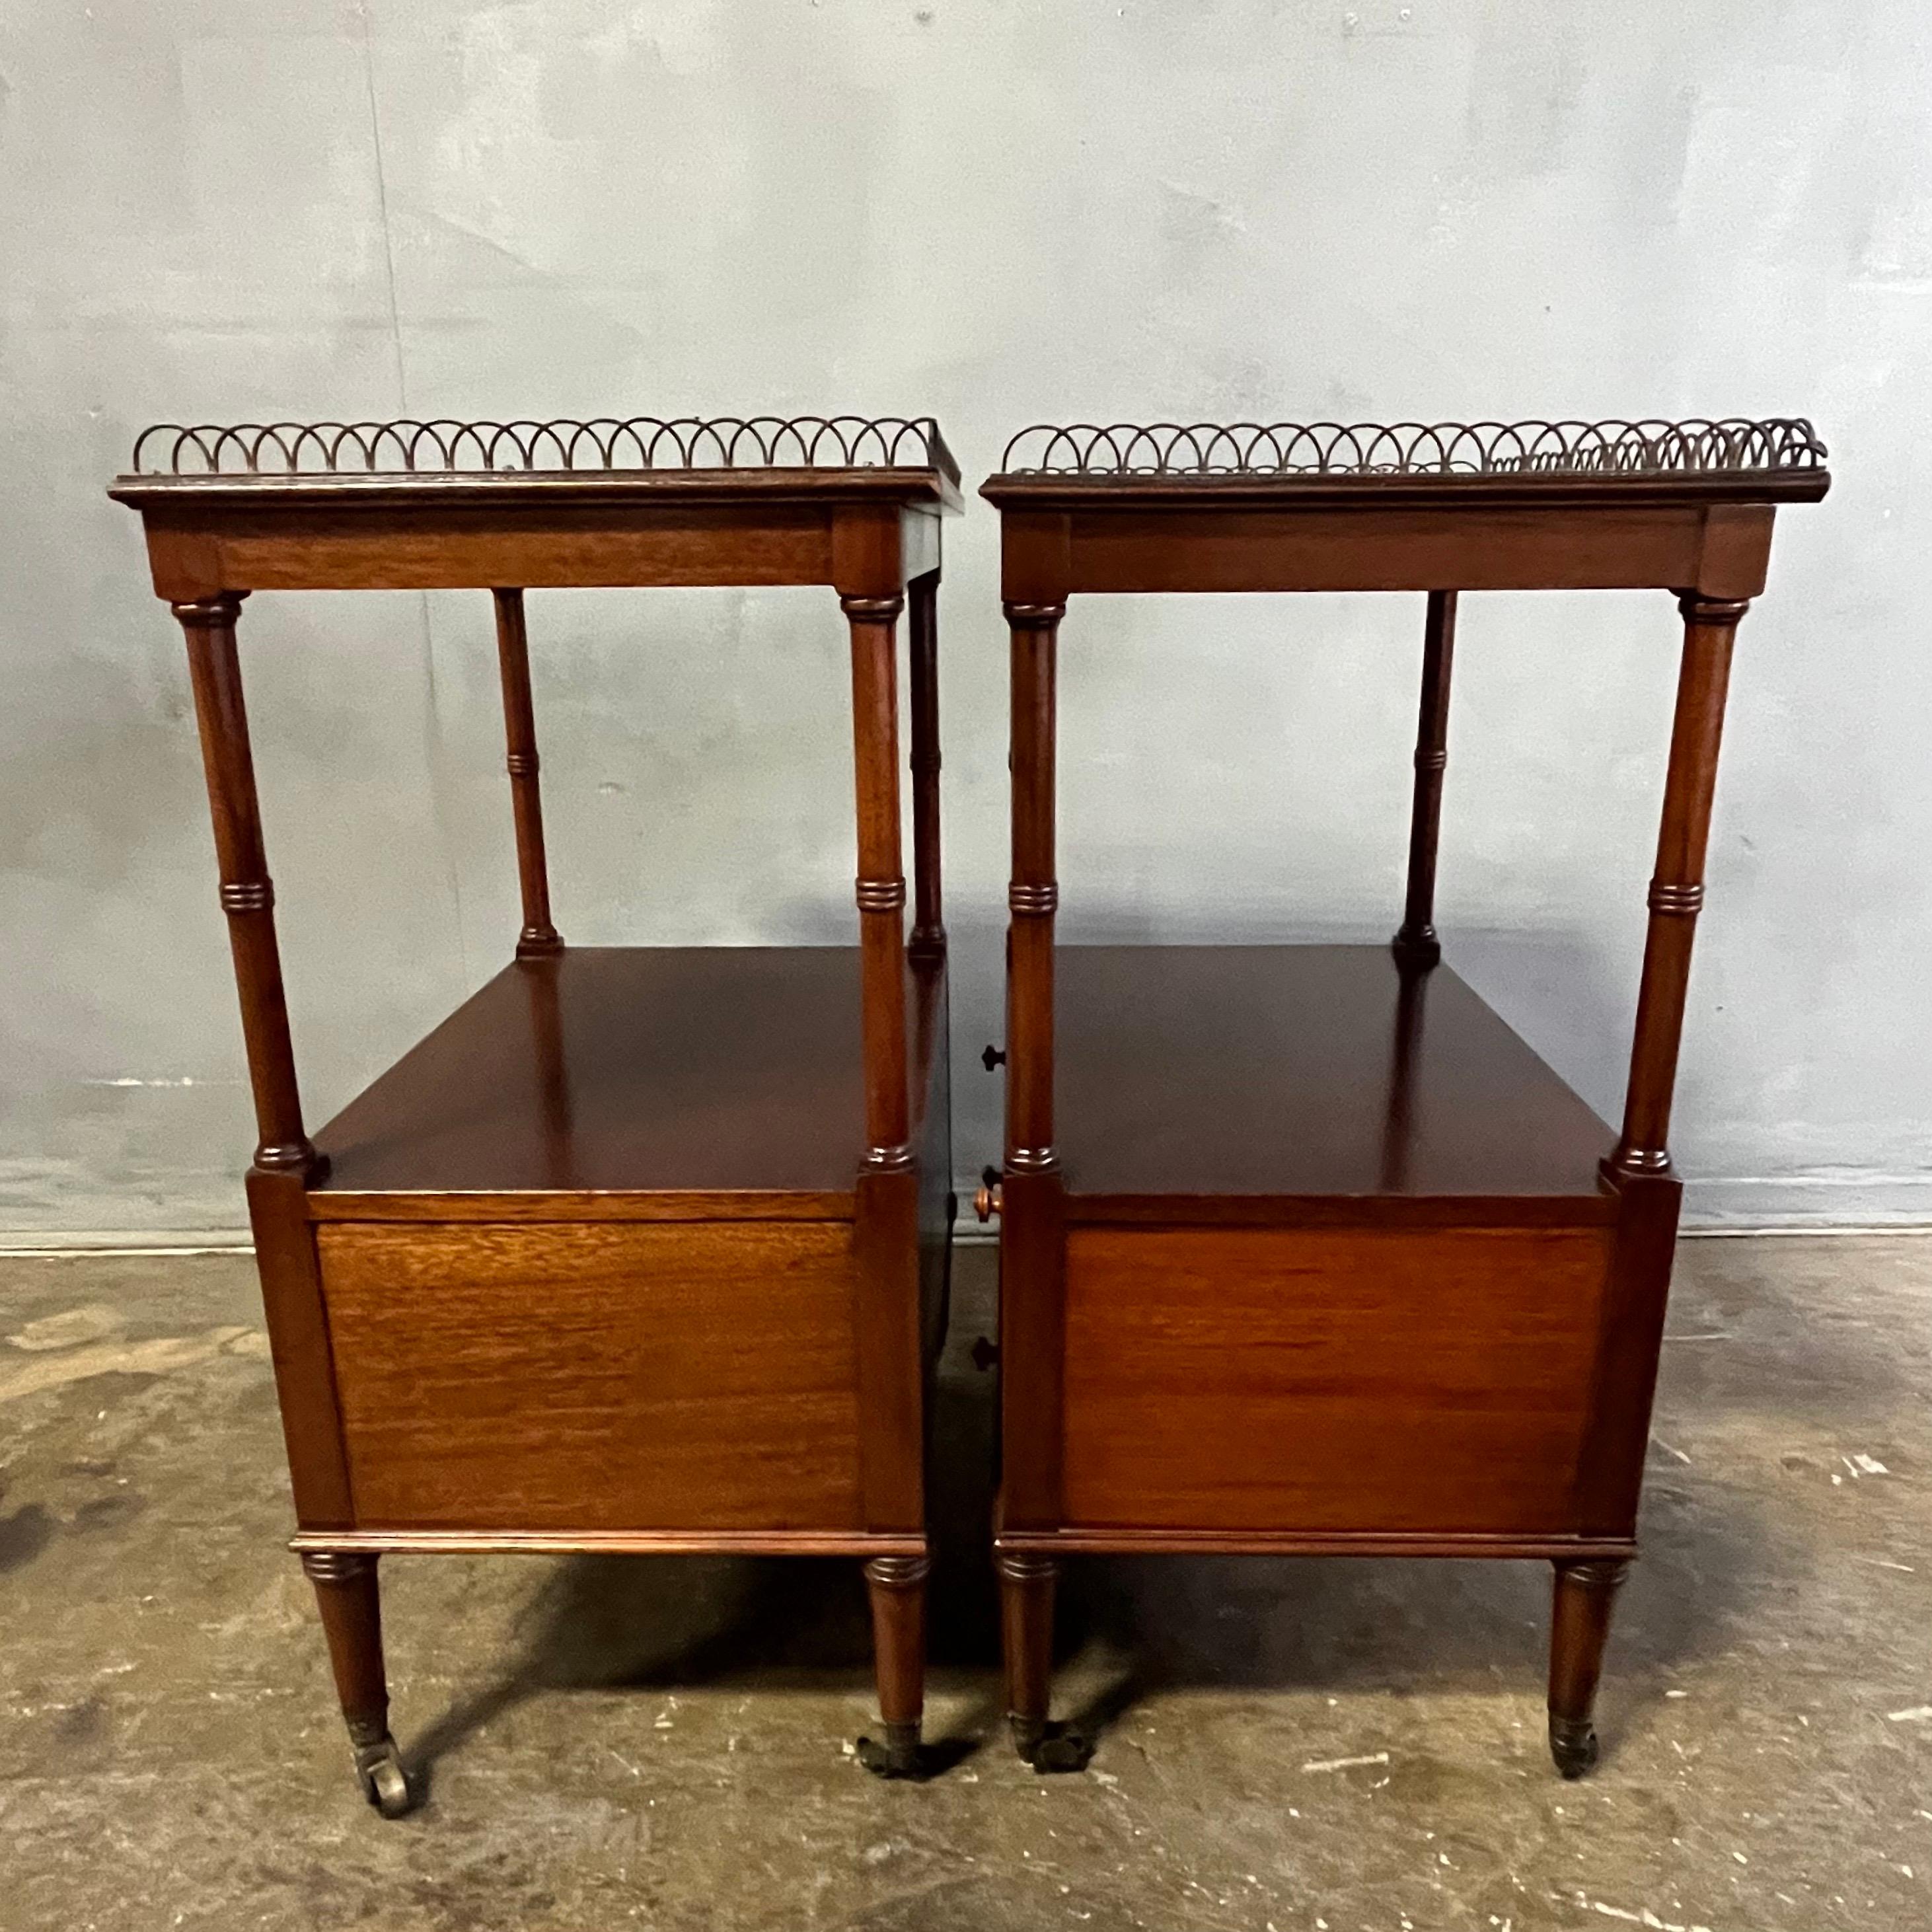 20th Century Vintage Petite Federal Style Mahogany Bedside Tables